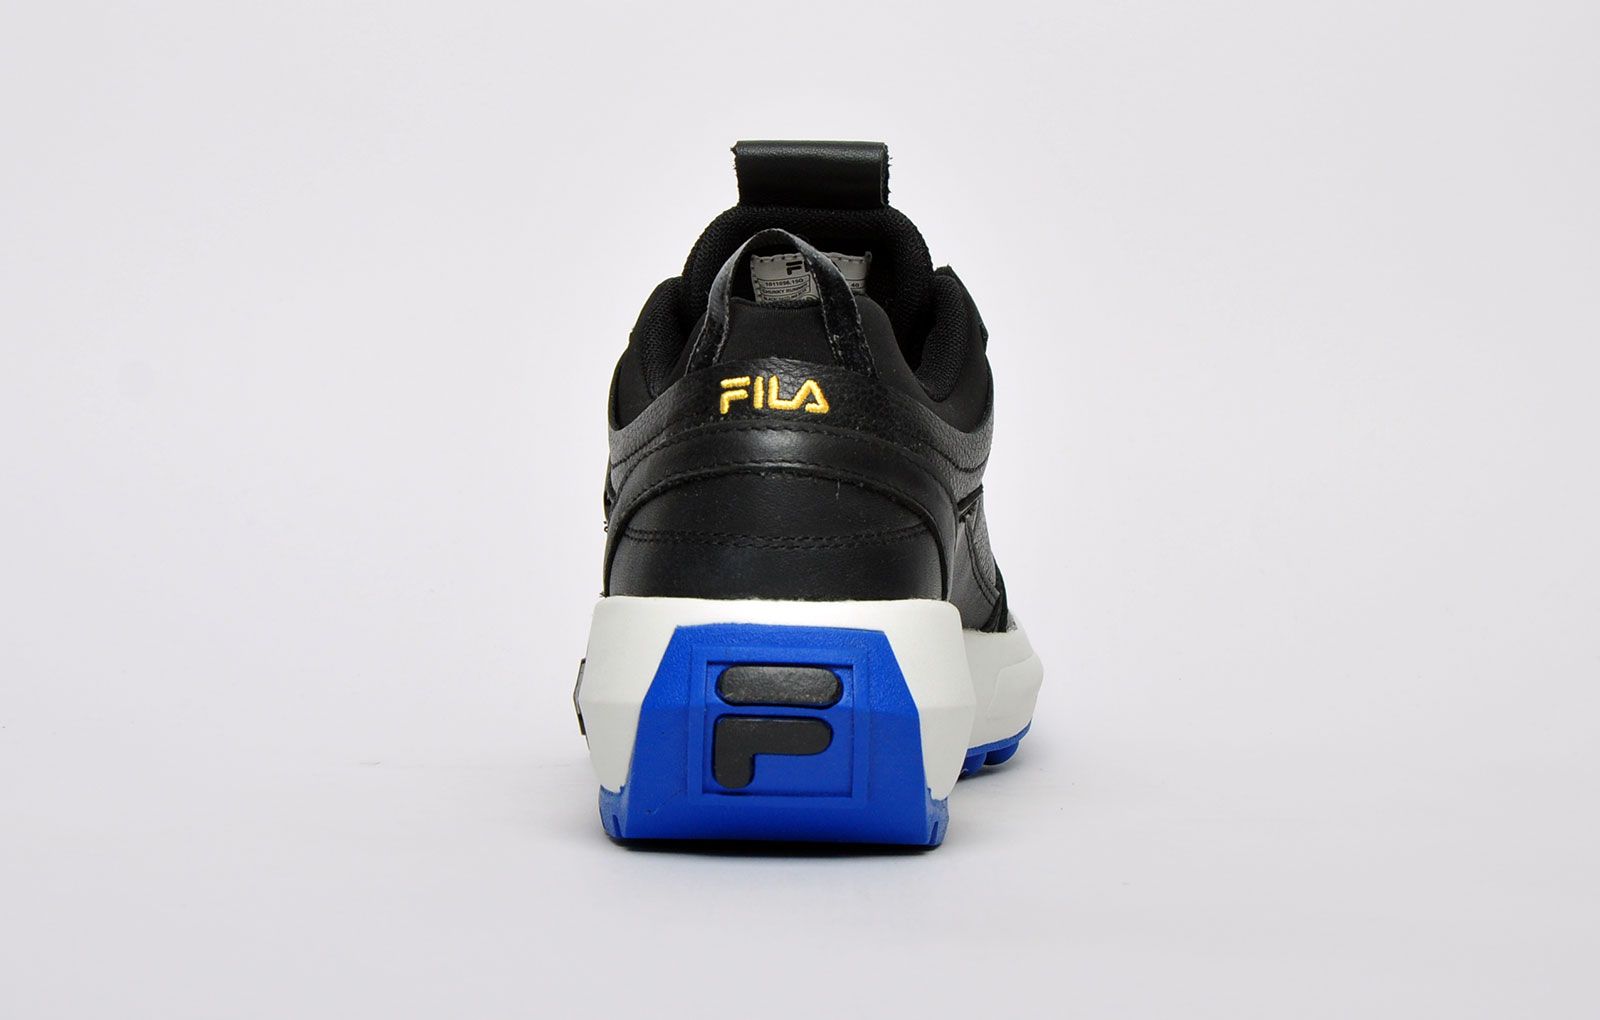 This men's Classic Fila Runner is constructed in a premium leather upper, with tonal lacing, sat on a cushioned EVA midsole for plush cushioning and impact protection, finished with an abrasion-resistant rubber outsole. <p class=